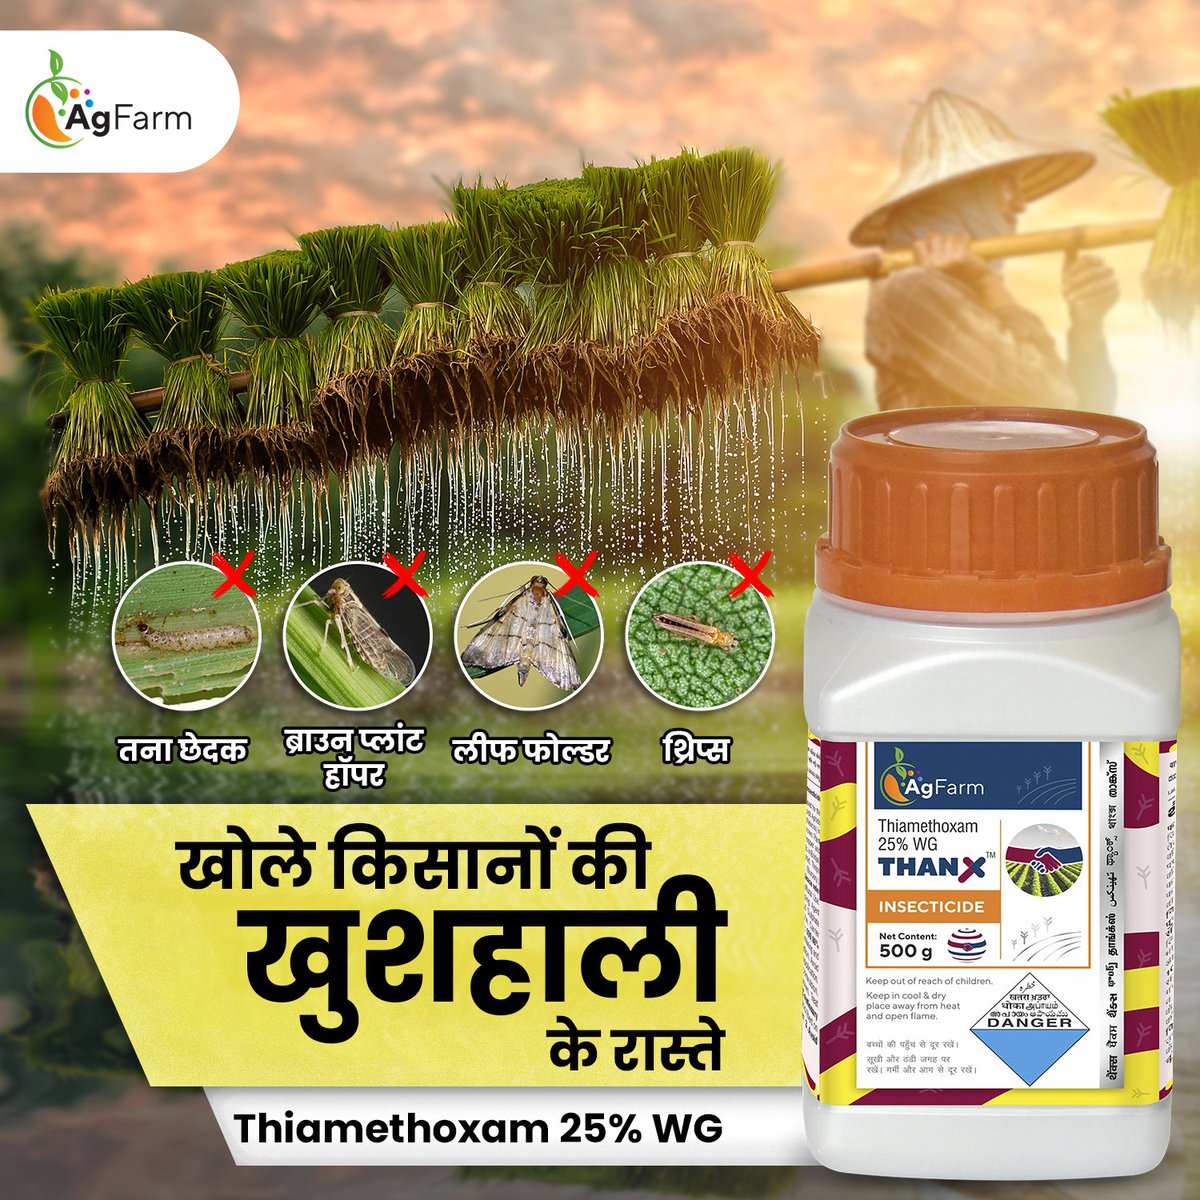 If you want to grow healthy crops and earn higher benefits in return then you must switch to AgFarm’s Thanx today because Thanx is a highly selective neonicotinoid insecticide that controls sucking pests swiftly in a wide variety of crops like paddy, cotton and vegetable crops.